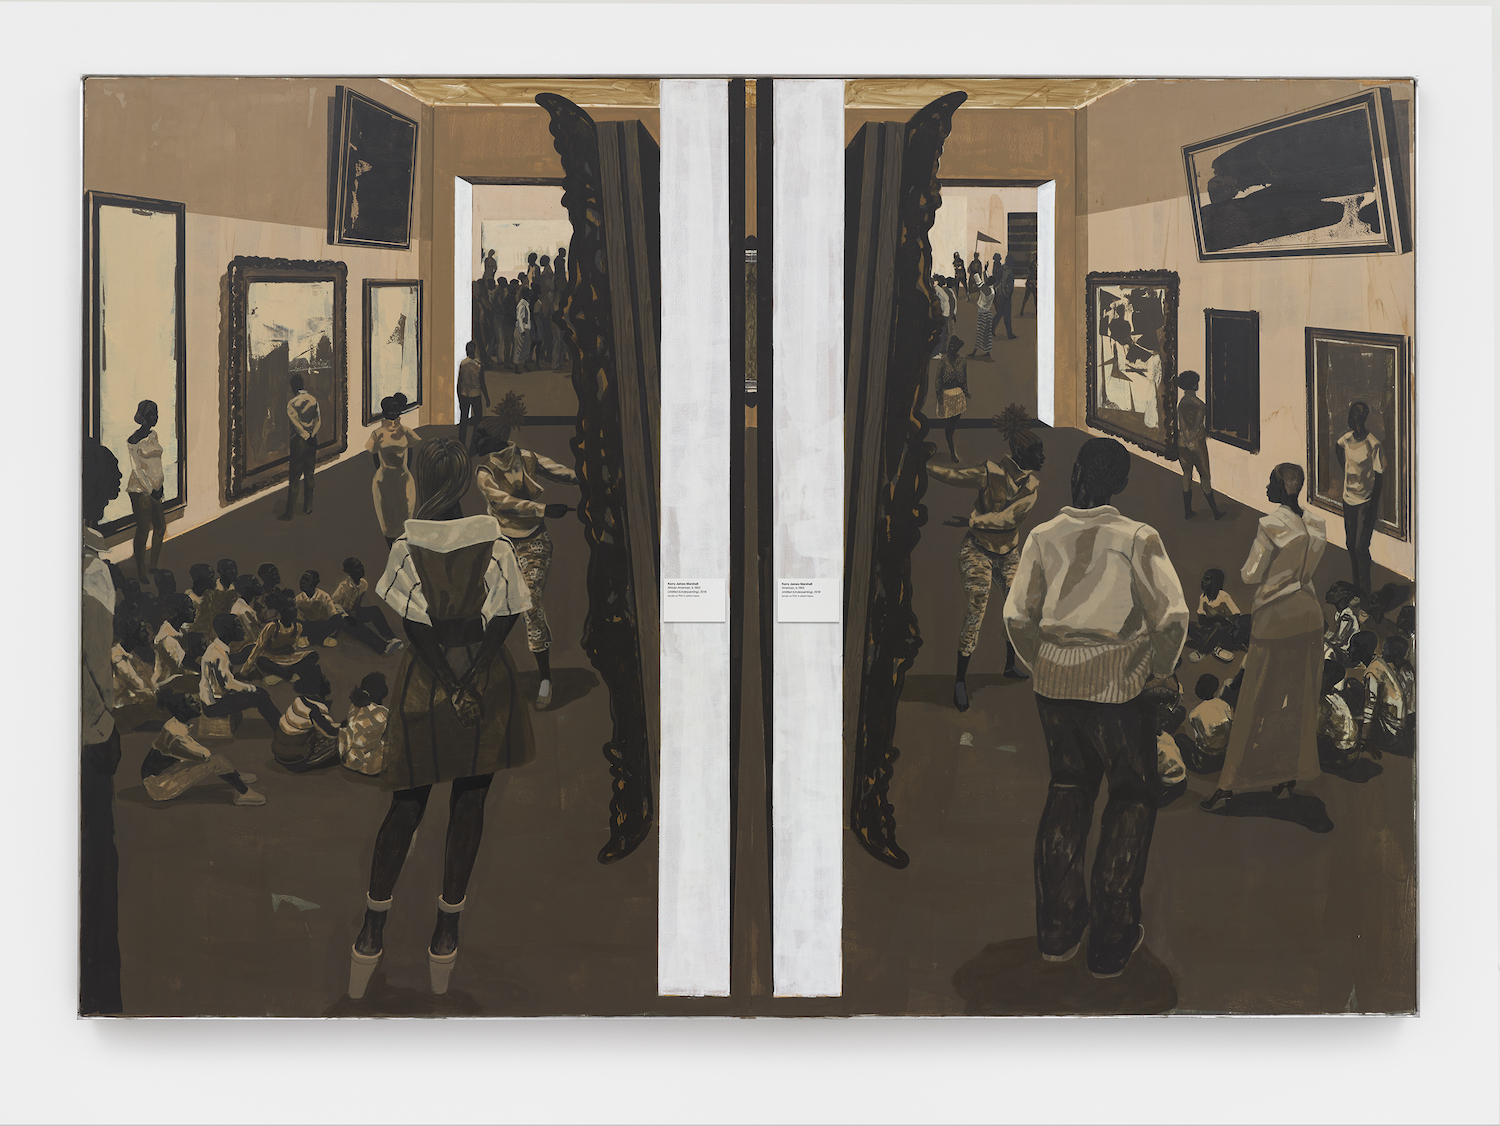 Untitled (Underpainting) 2018 215.2 x 305.5 x 10.2 cm © Kerry James Marshall Courtesy the artist and David Zwirner